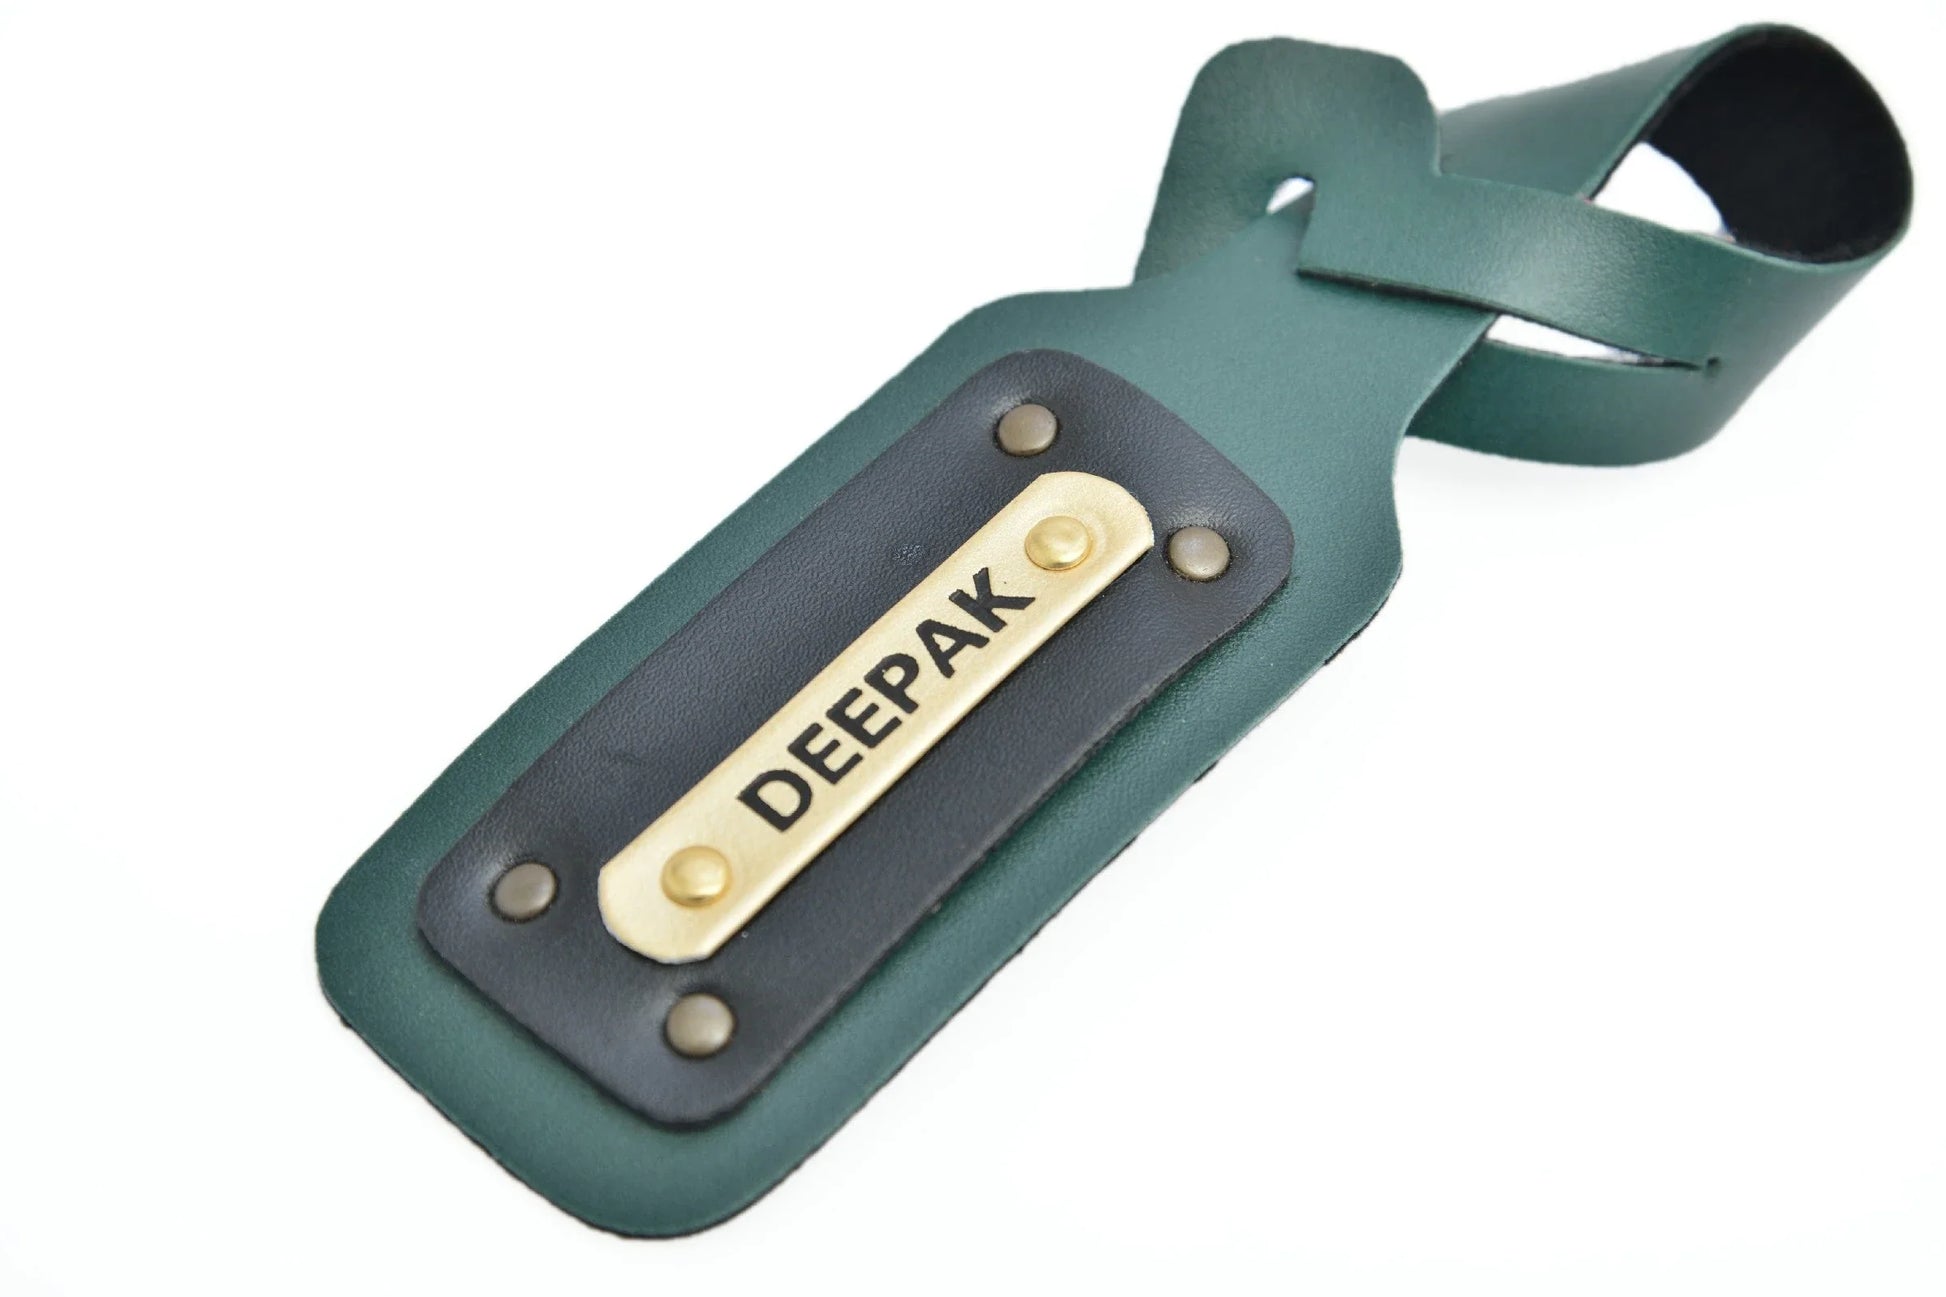 Add a Touch of Luxury to Your Travel Gear with the Premium and Personalized Luggage Tag.